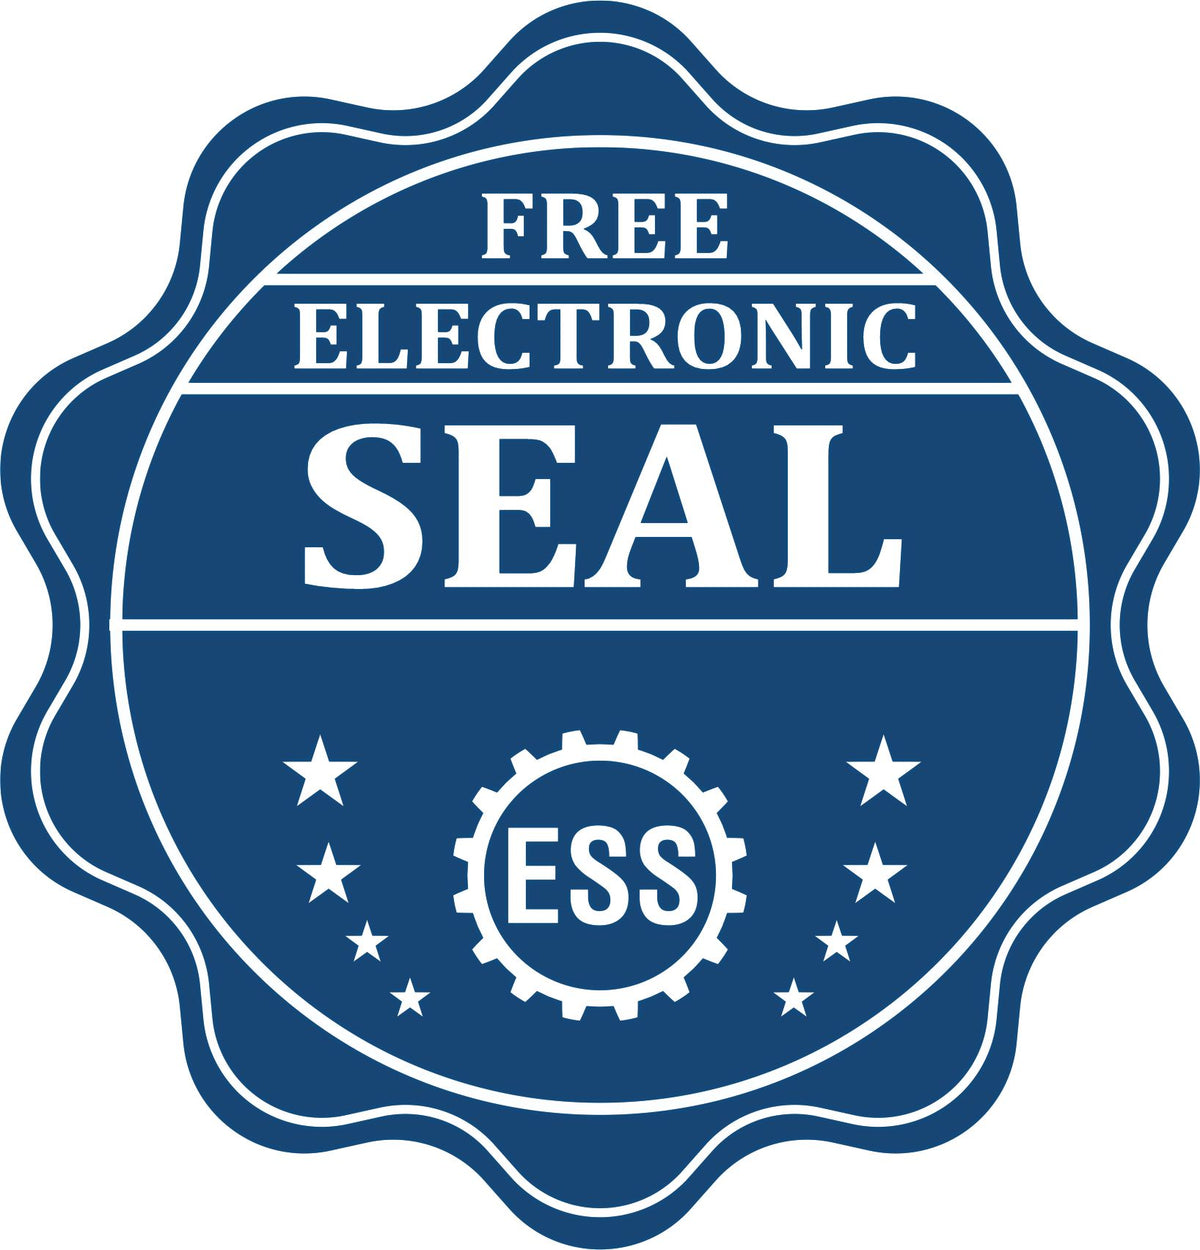 A badge showing a free electronic seal for the Gift Guam Architect Seal with stars and the ESS gear on the emblem.